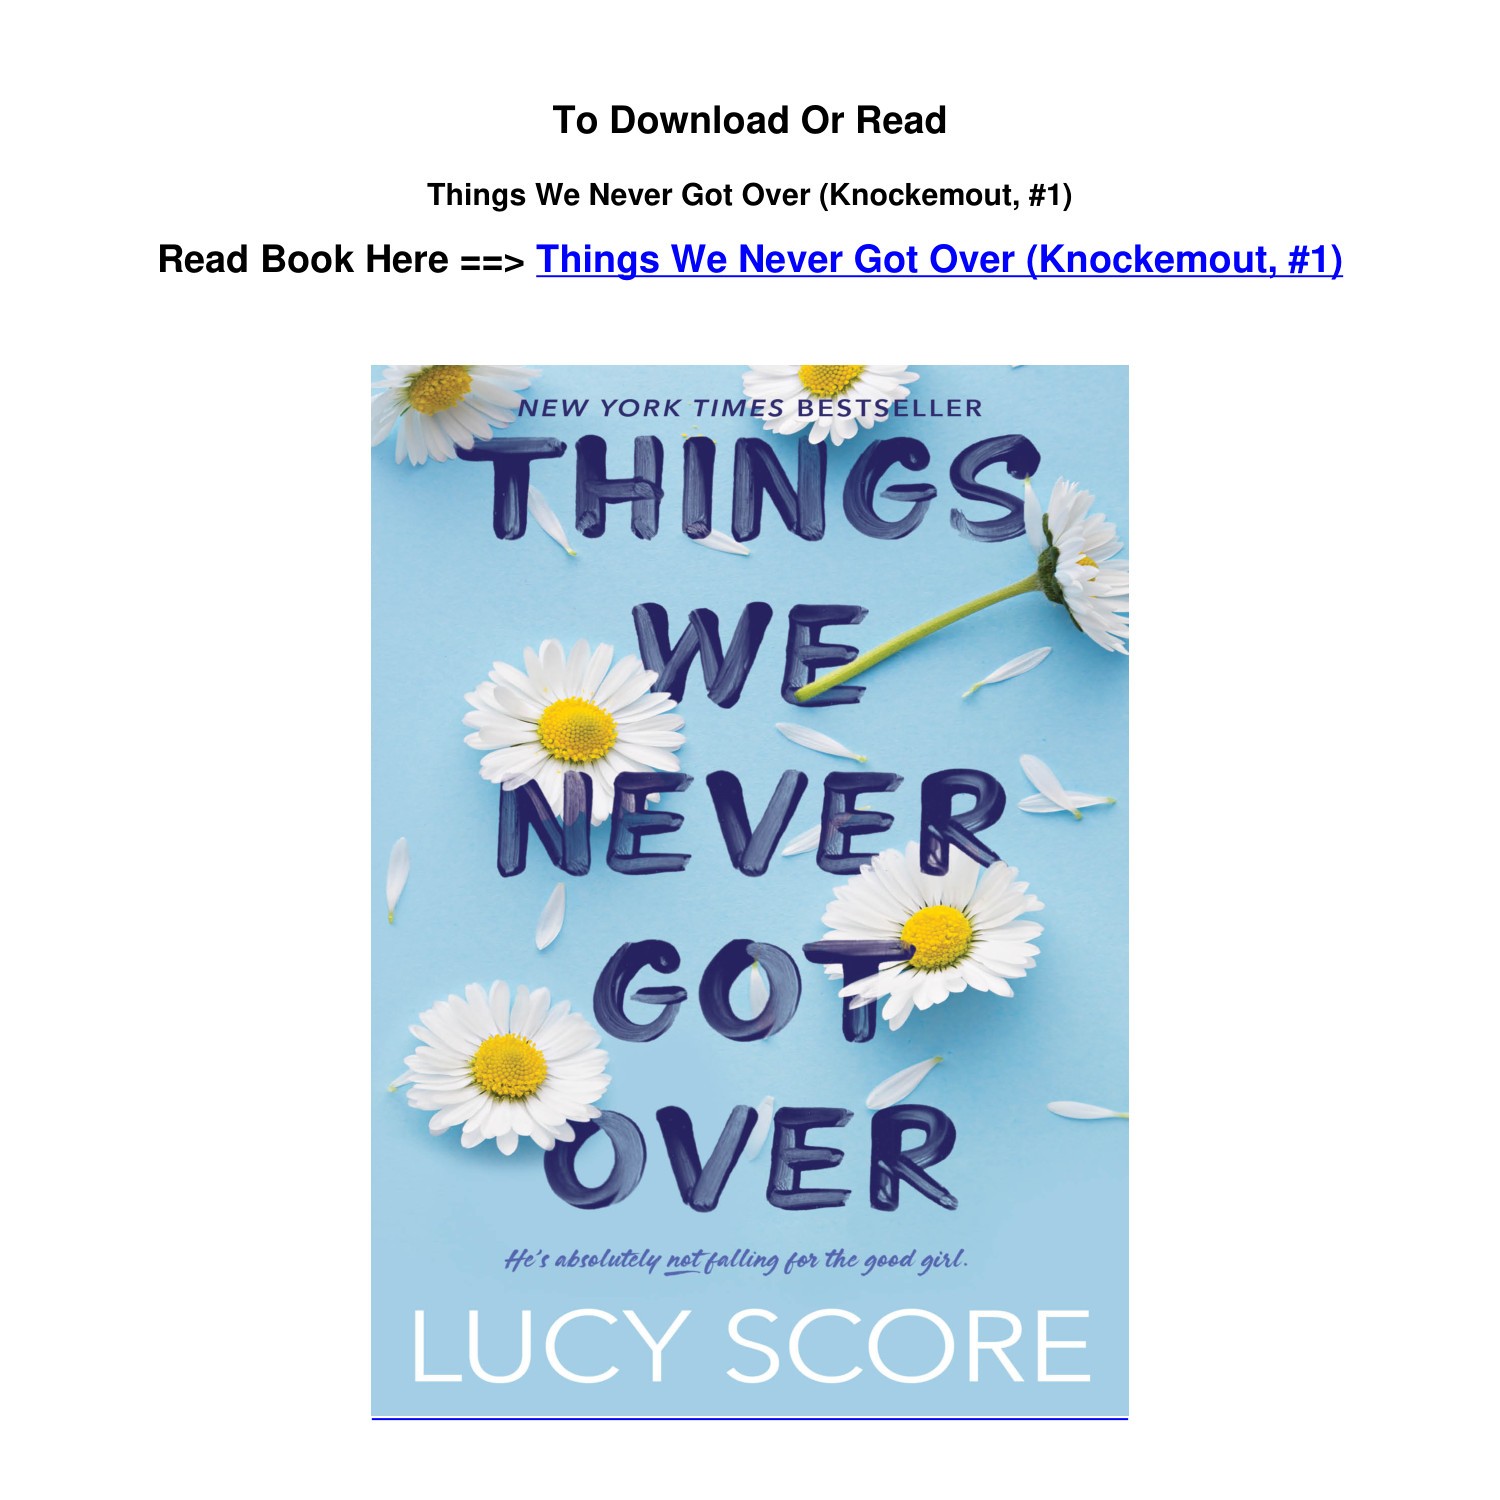 Things We Never Got Over Audiobook Free Knockemout Book 1 - Part 2